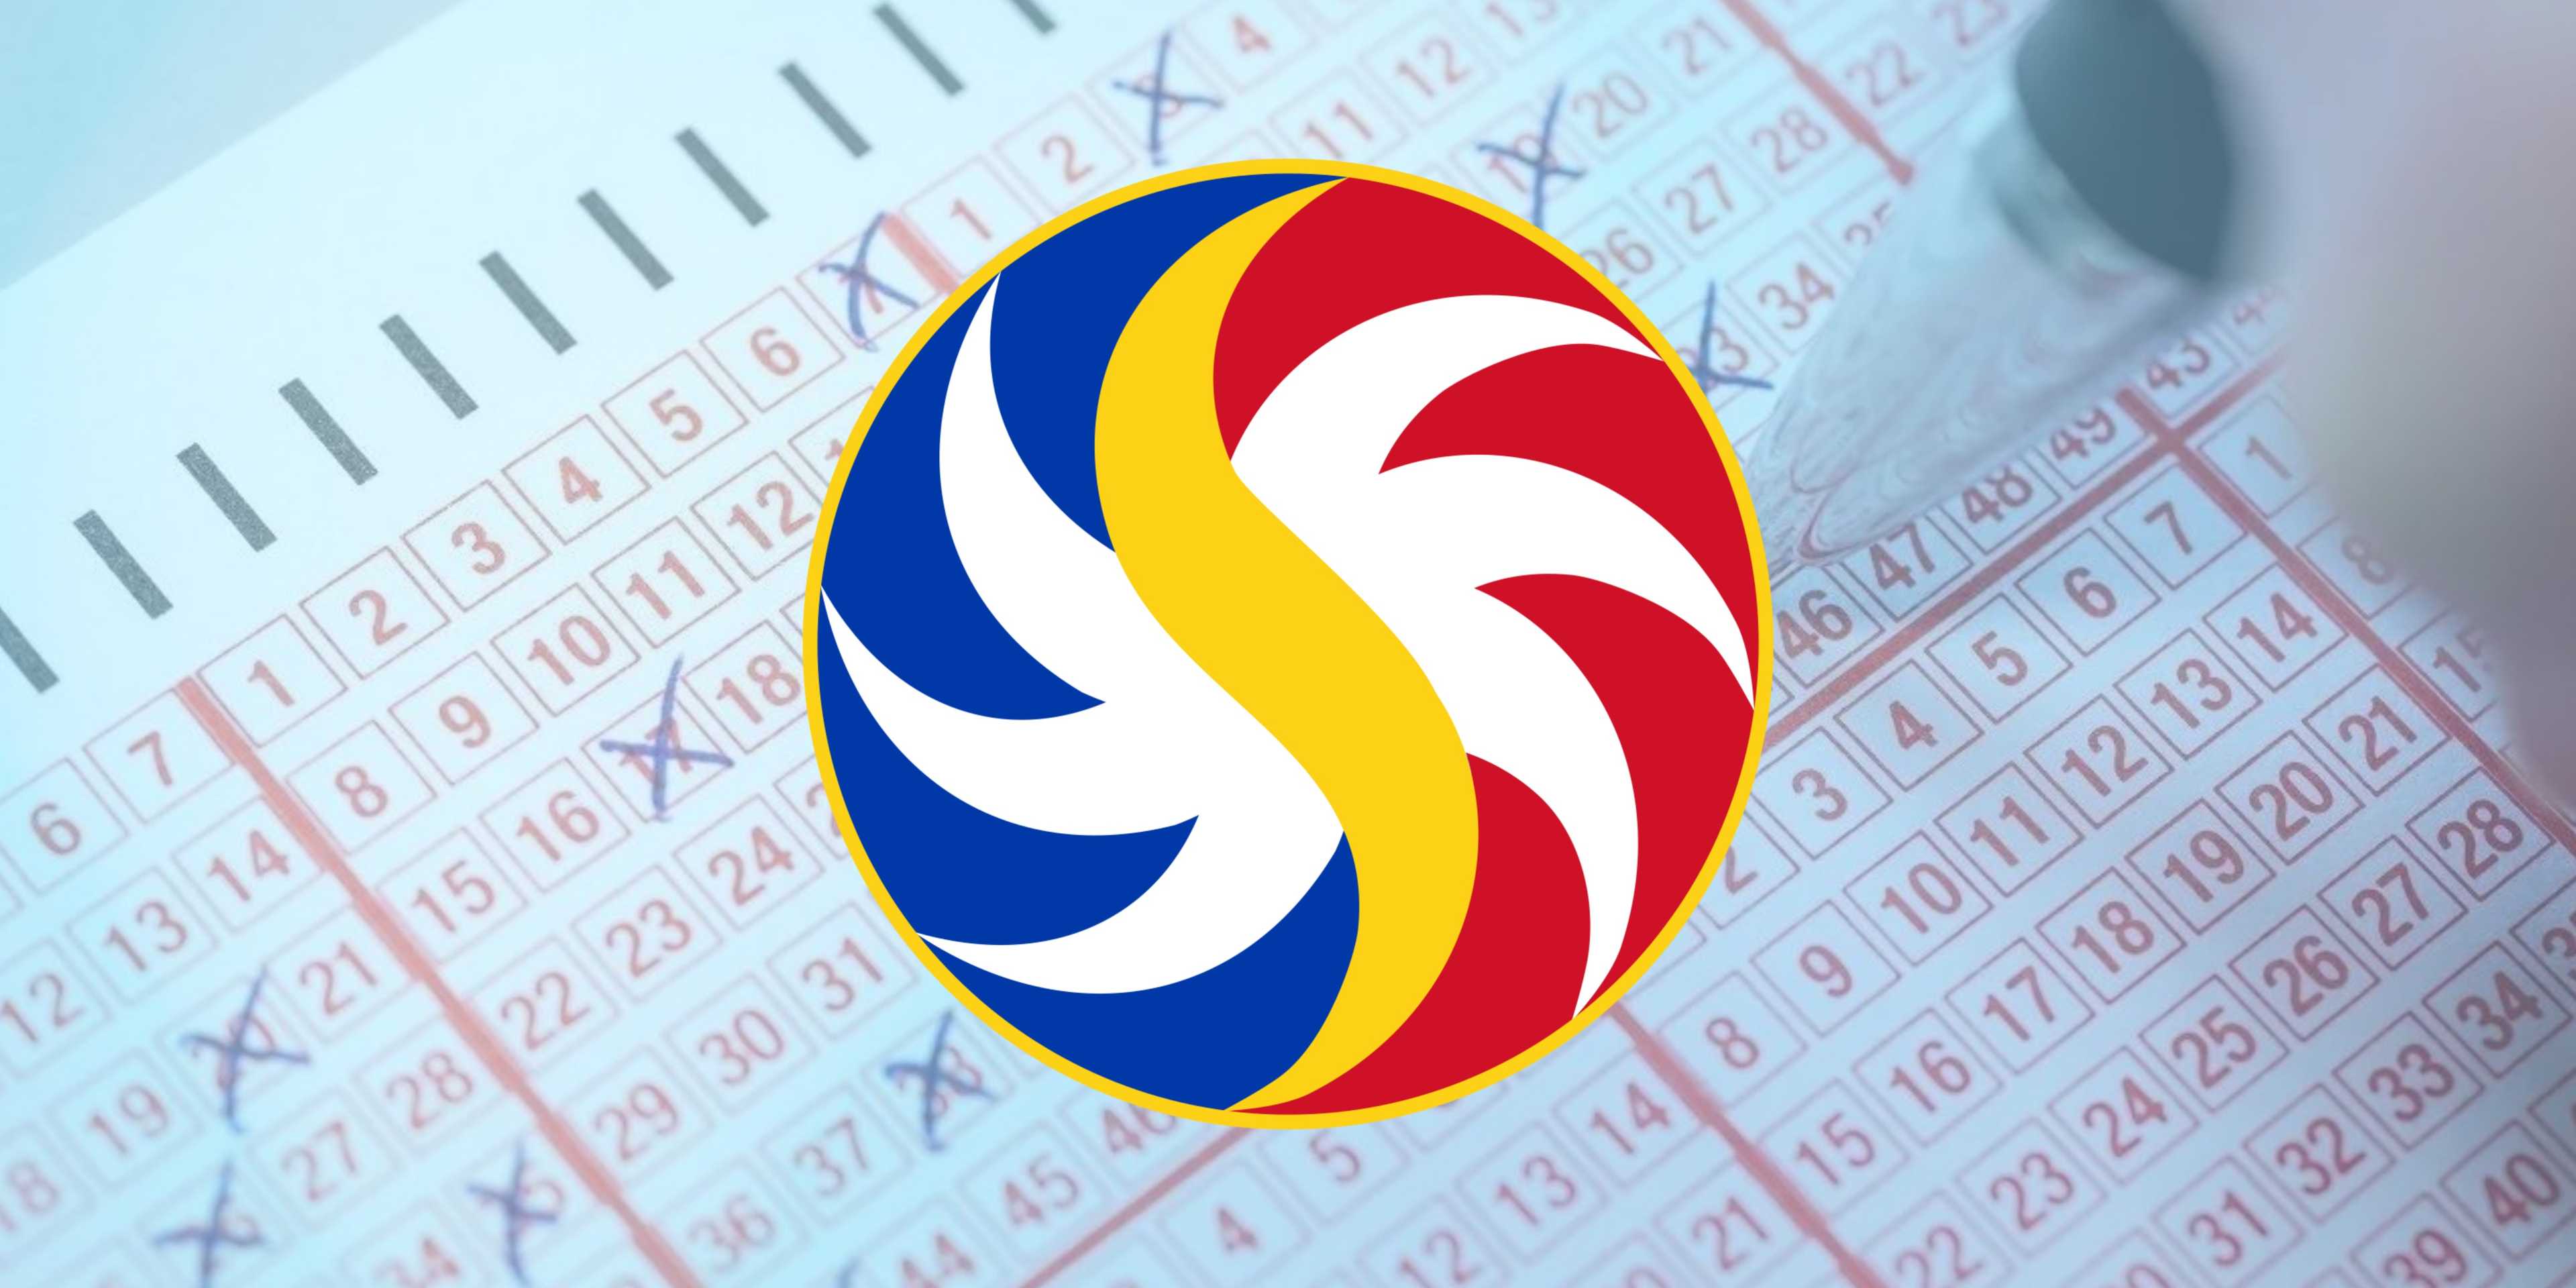 PCSO Lotto Draw Results on Tuesday, February 20